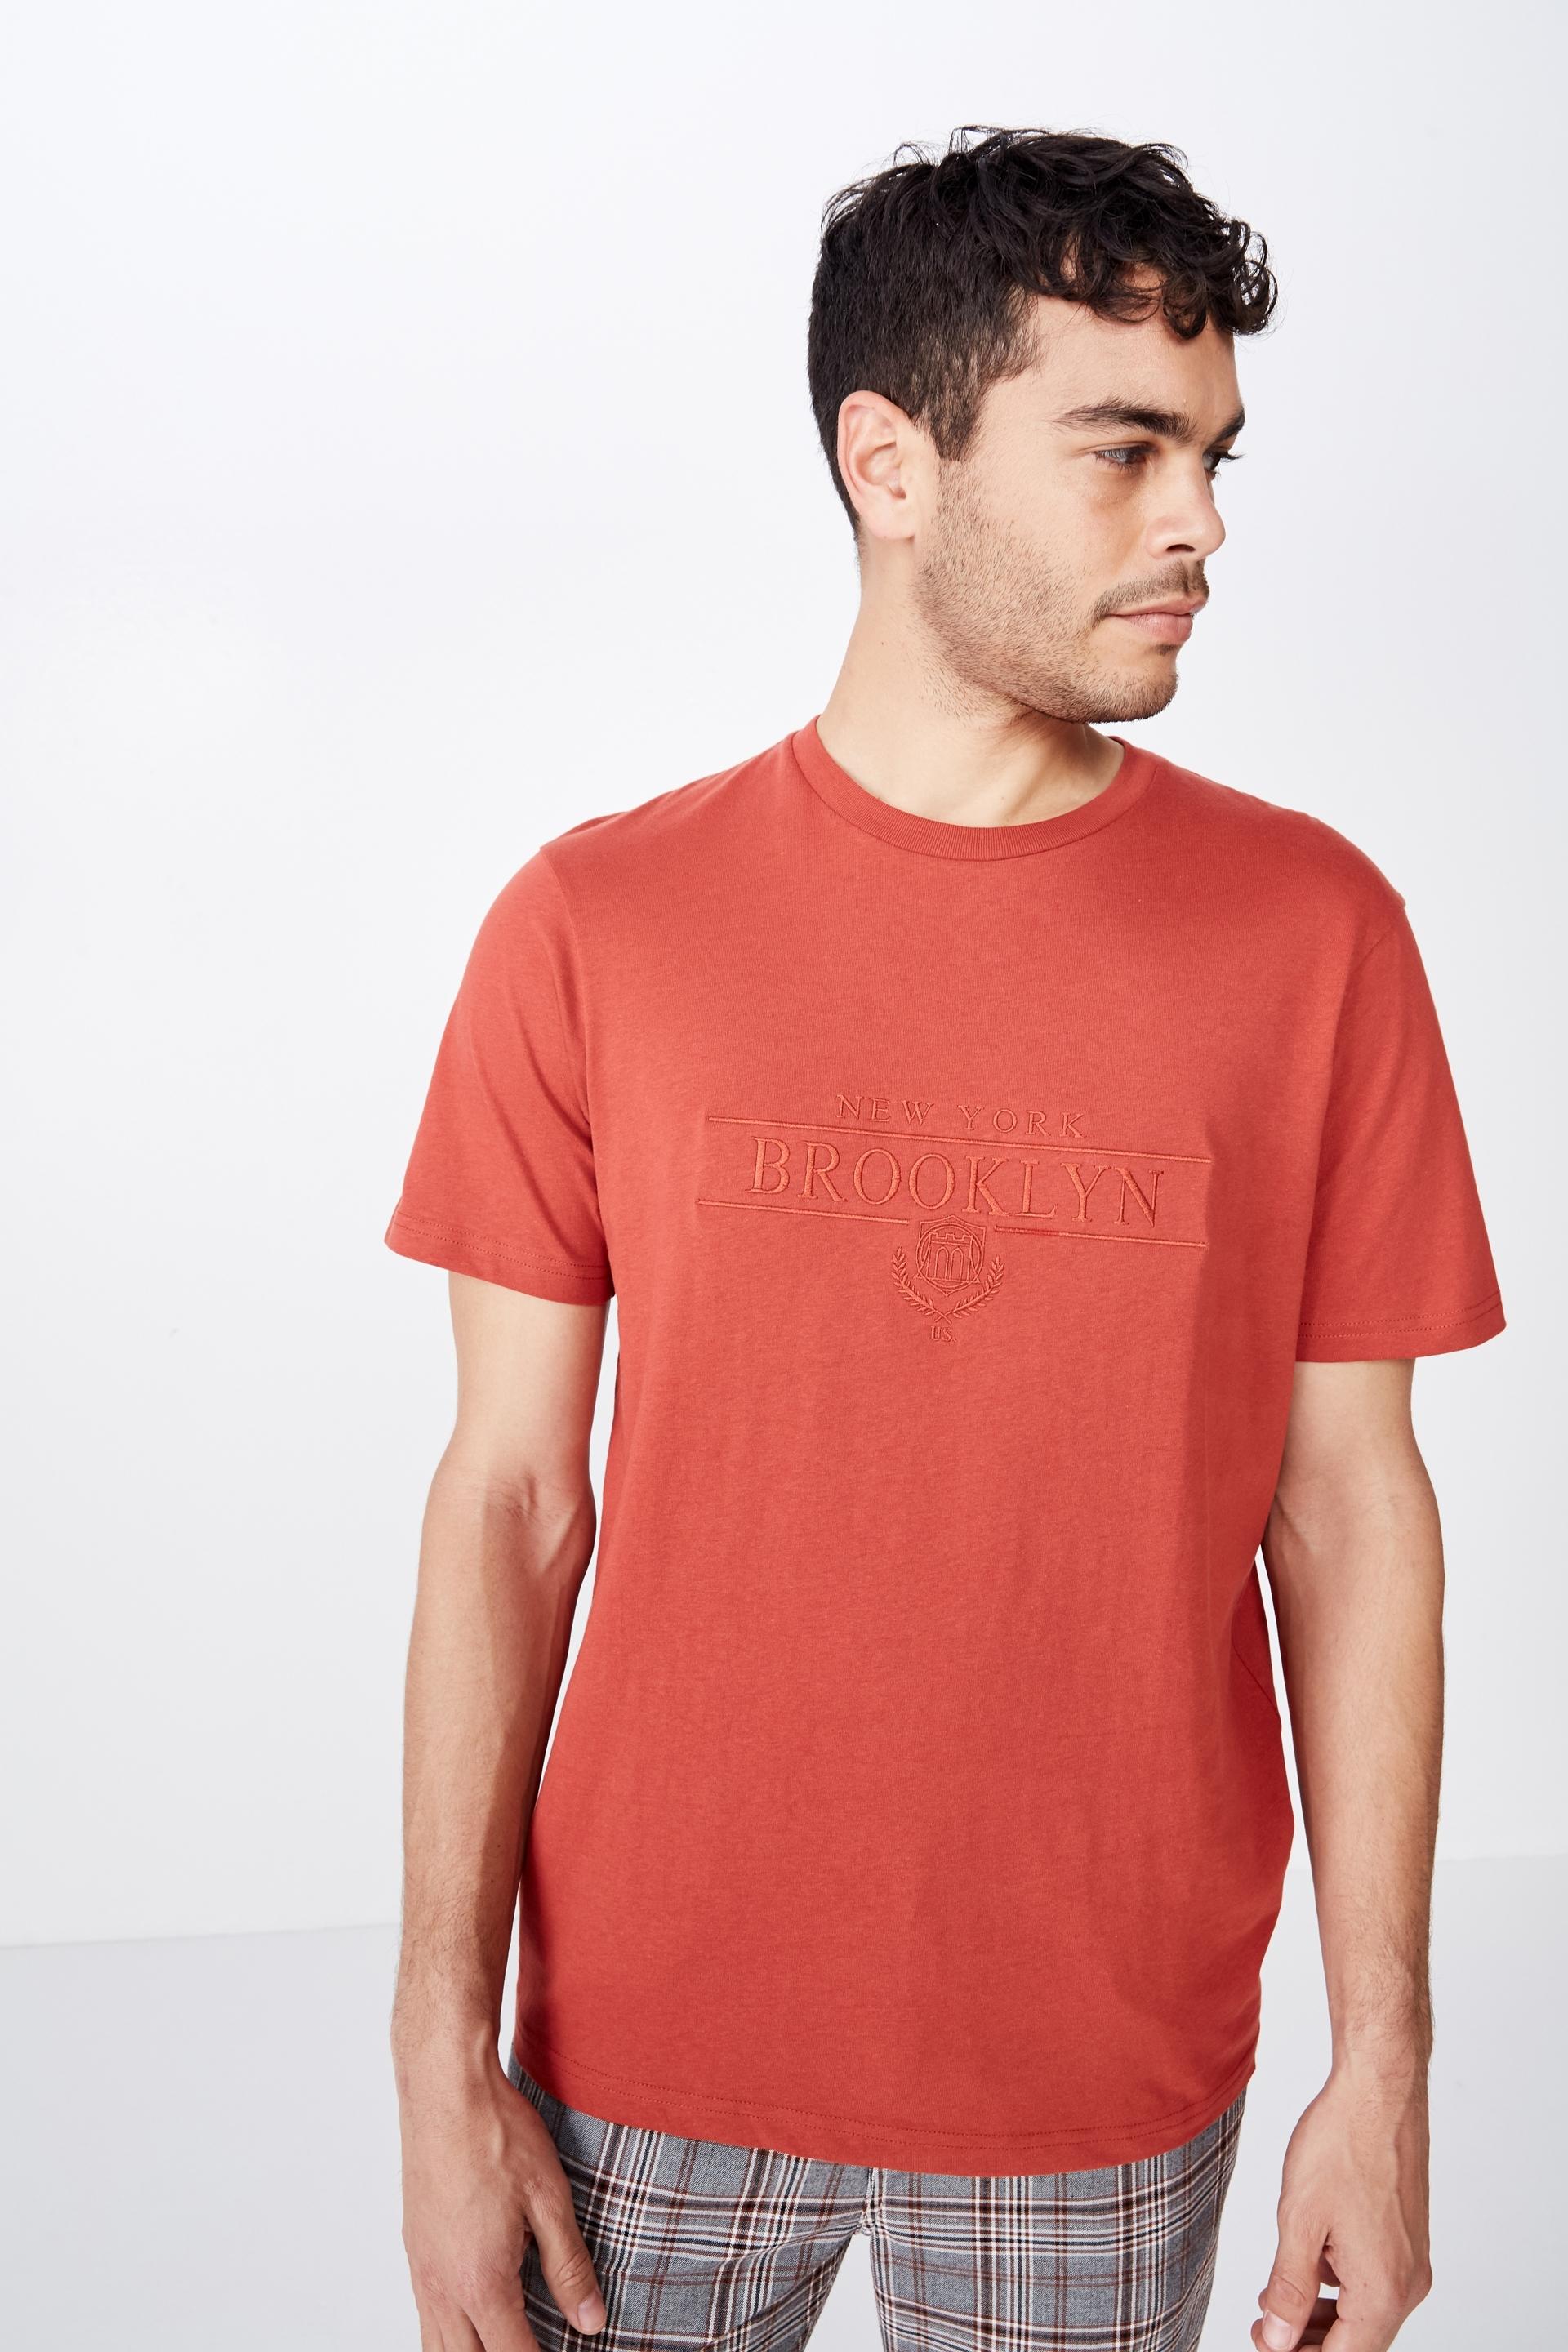 Brooklyn us tee - red Cotton On T-Shirts & Vests | Superbalist.com